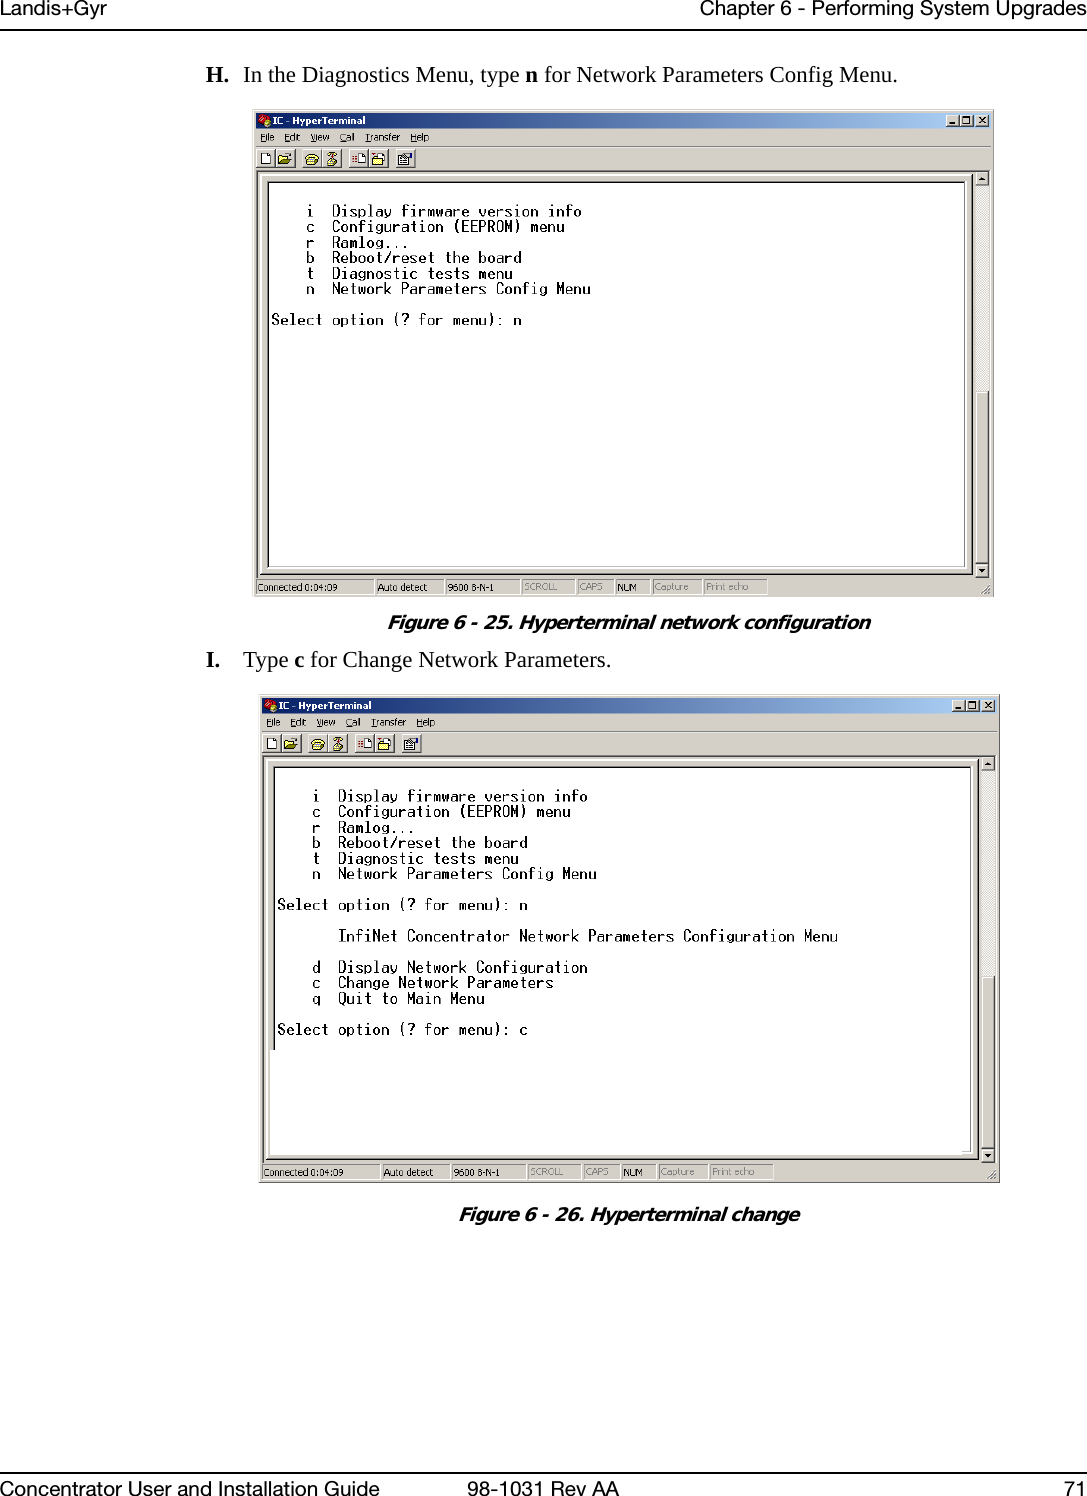 Landis+Gyr Chapter 6 - Performing System UpgradesConcentrator User and Installation Guide 98-1031 Rev AA 71H. In the Diagnostics Menu, type n for Network Parameters Config Menu.Figure 6 - 25. Hyperterminal network configurationI. Type c for Change Network Parameters.Figure 6 - 26. Hyperterminal change